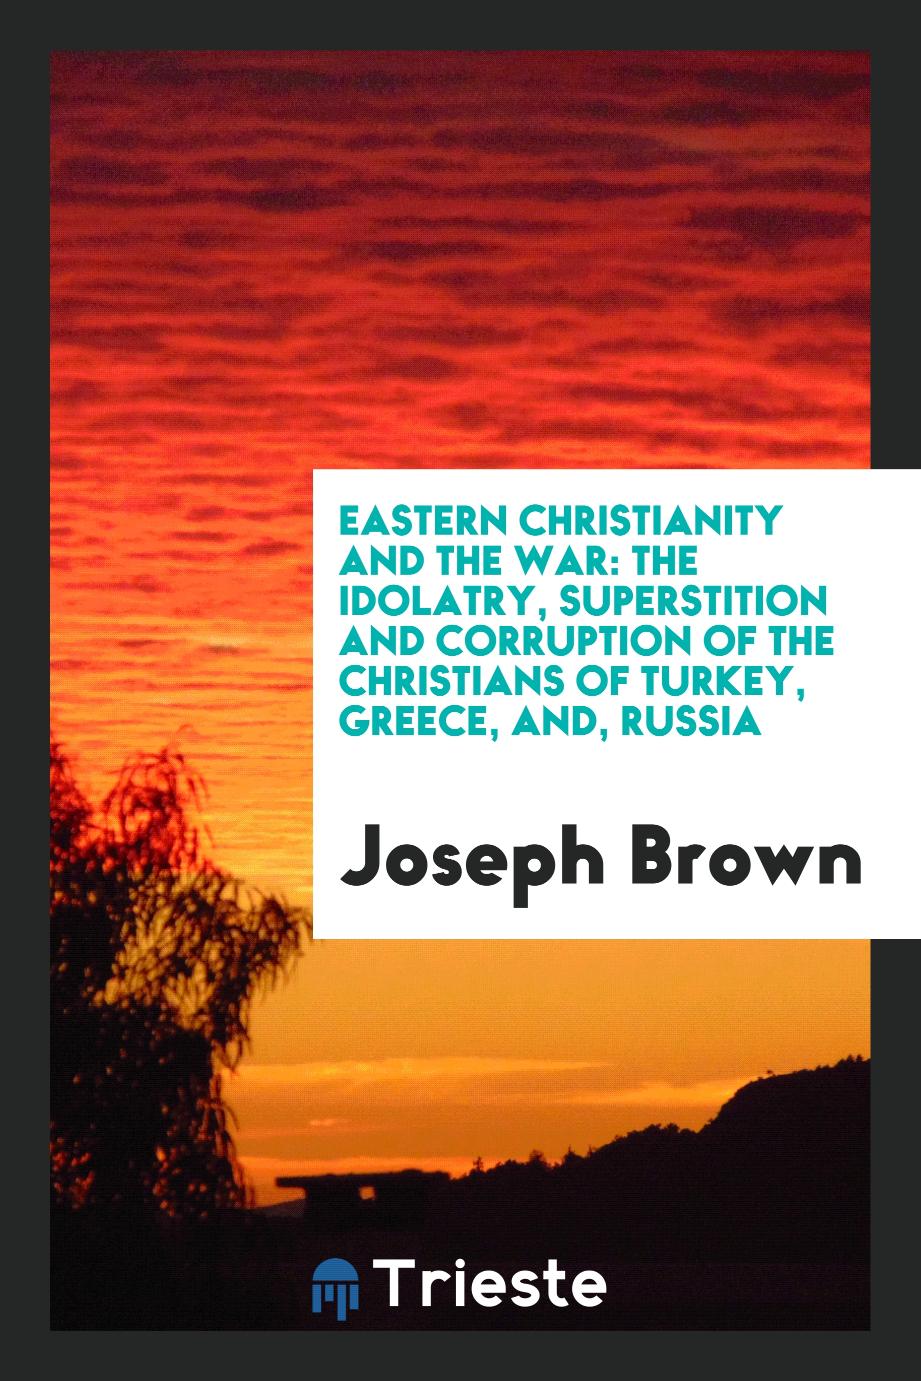 Eastern Christianity and the War: The Idolatry, Superstition and Corruption of the Christians of Turkey, Greece, and, Russia